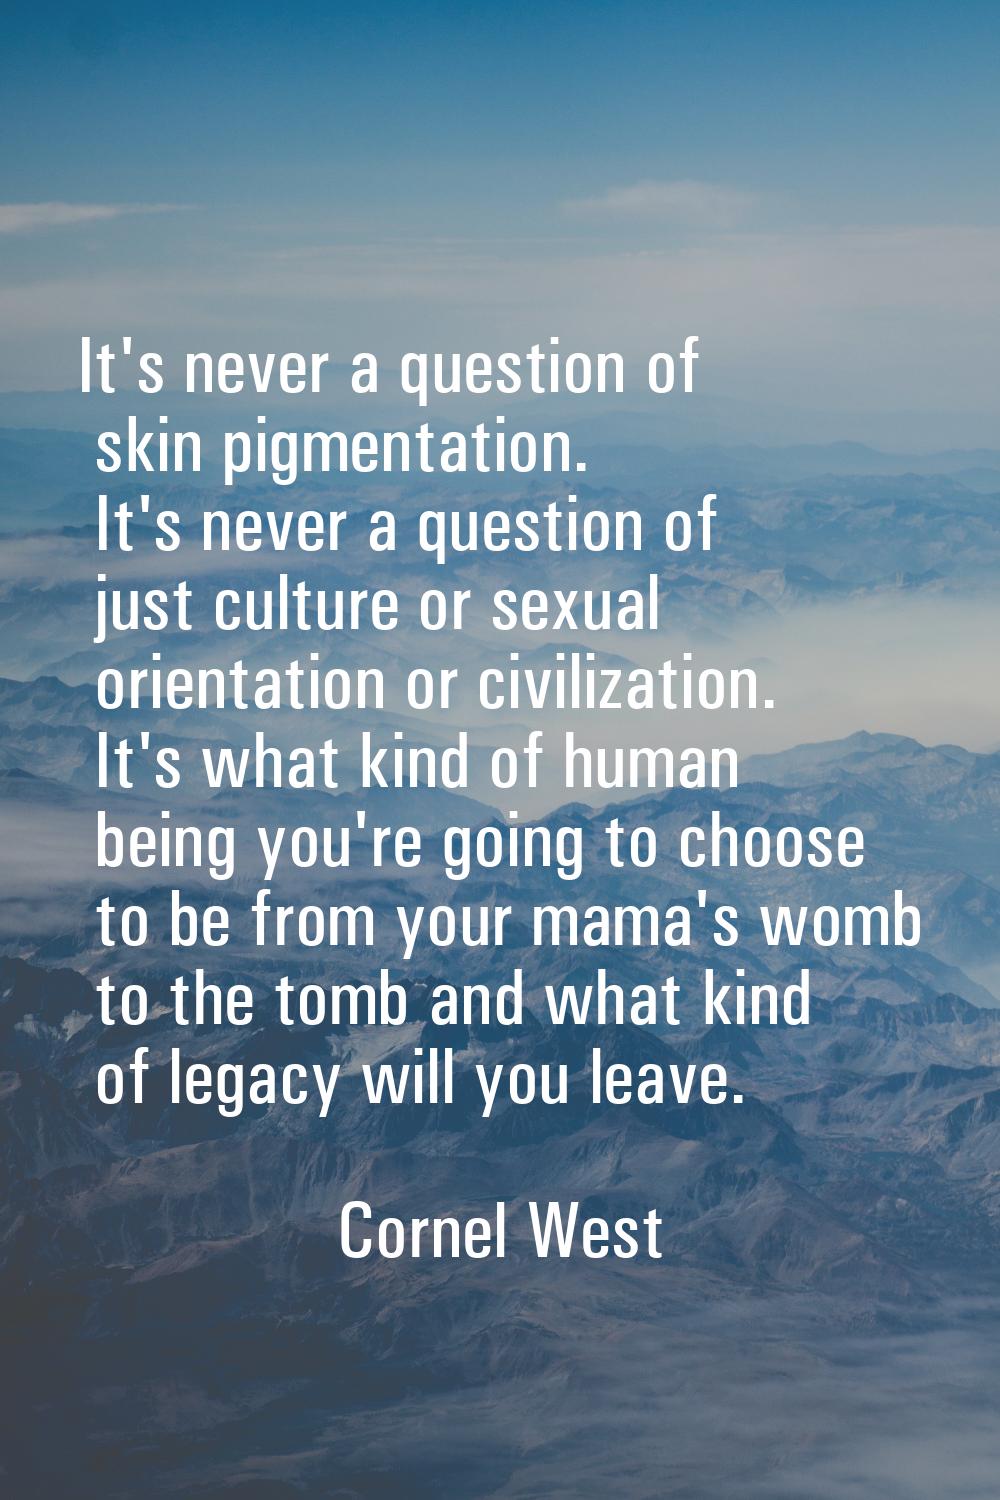 It's never a question of skin pigmentation. It's never a question of just culture or sexual orienta